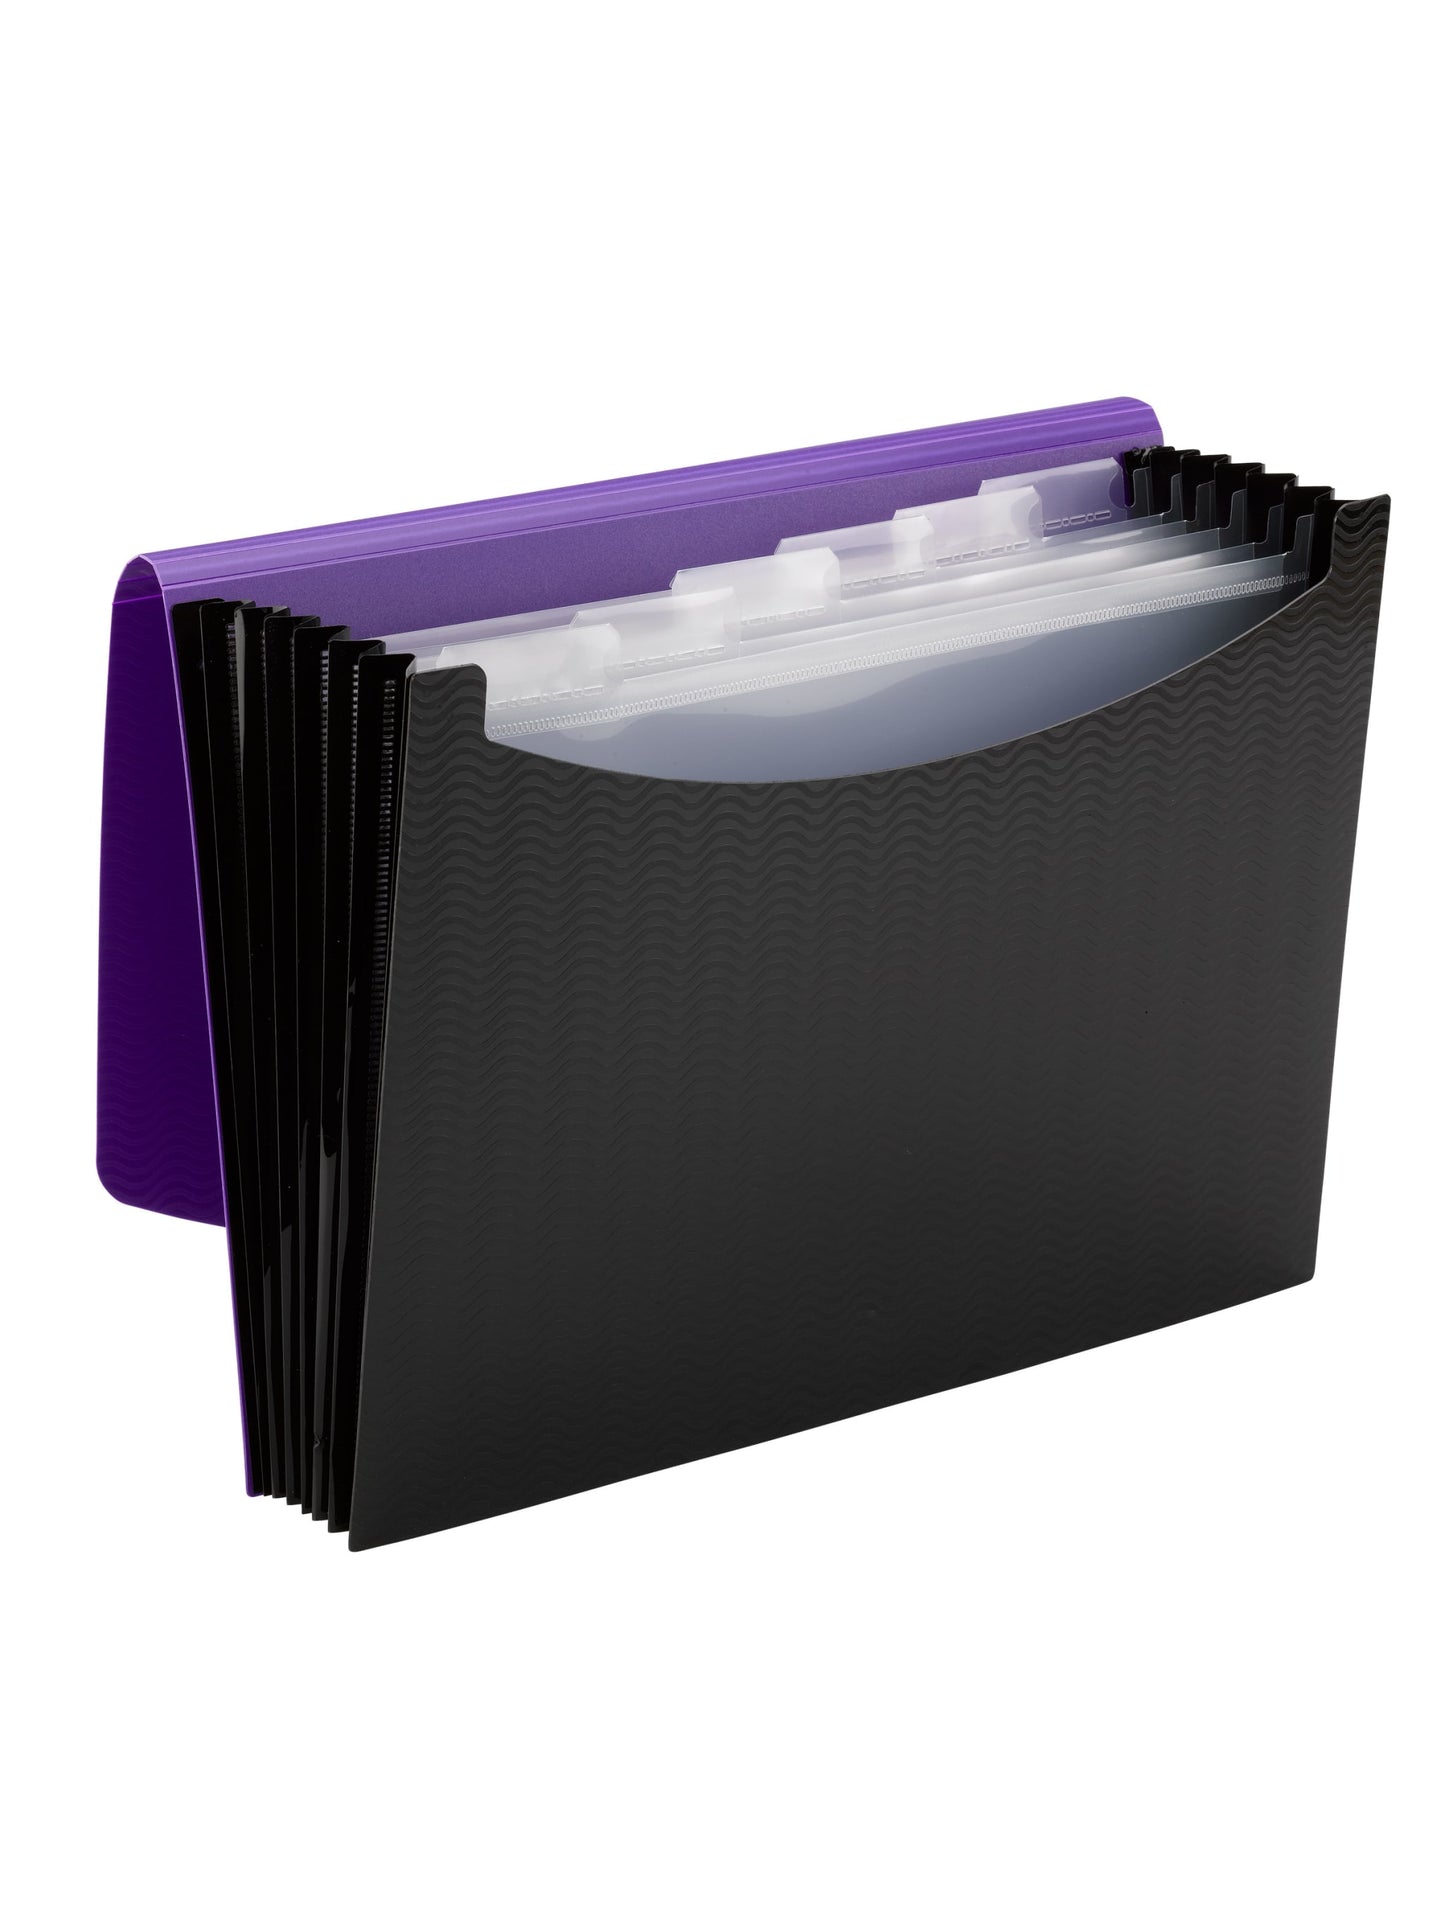 Poly Expanding Files with Flap, 6 Pockets, Wave Pattern, Purple Color, Letter Size, Set of 1, 086486708821